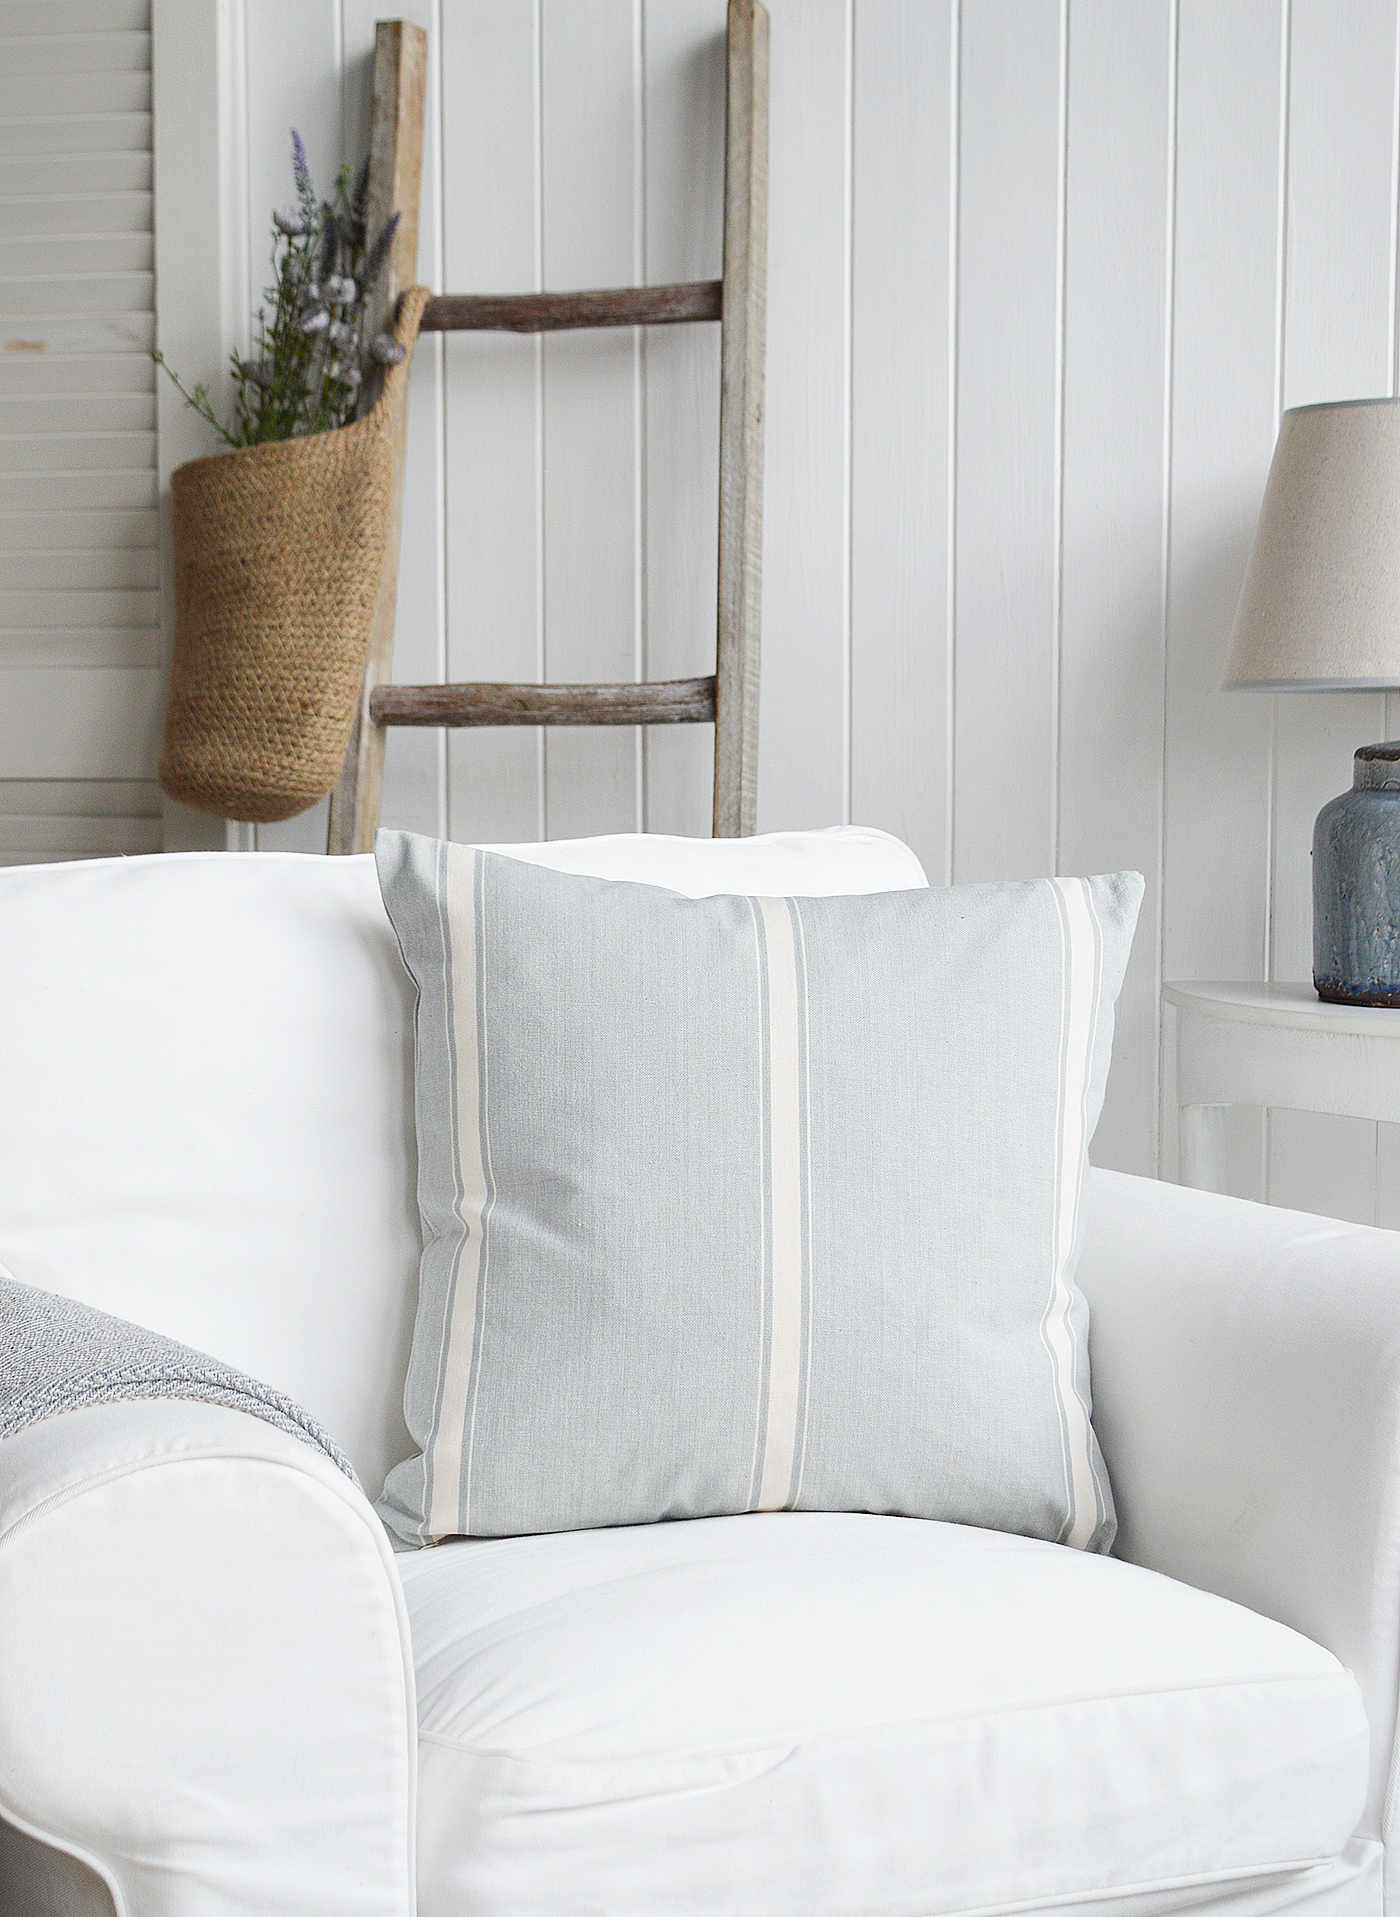 The Harper Cushion. In blue grey and soft white, ideal for luxurious coastal cushion in New England and Hamptons styled interiors from the White Lighthouse Furniture